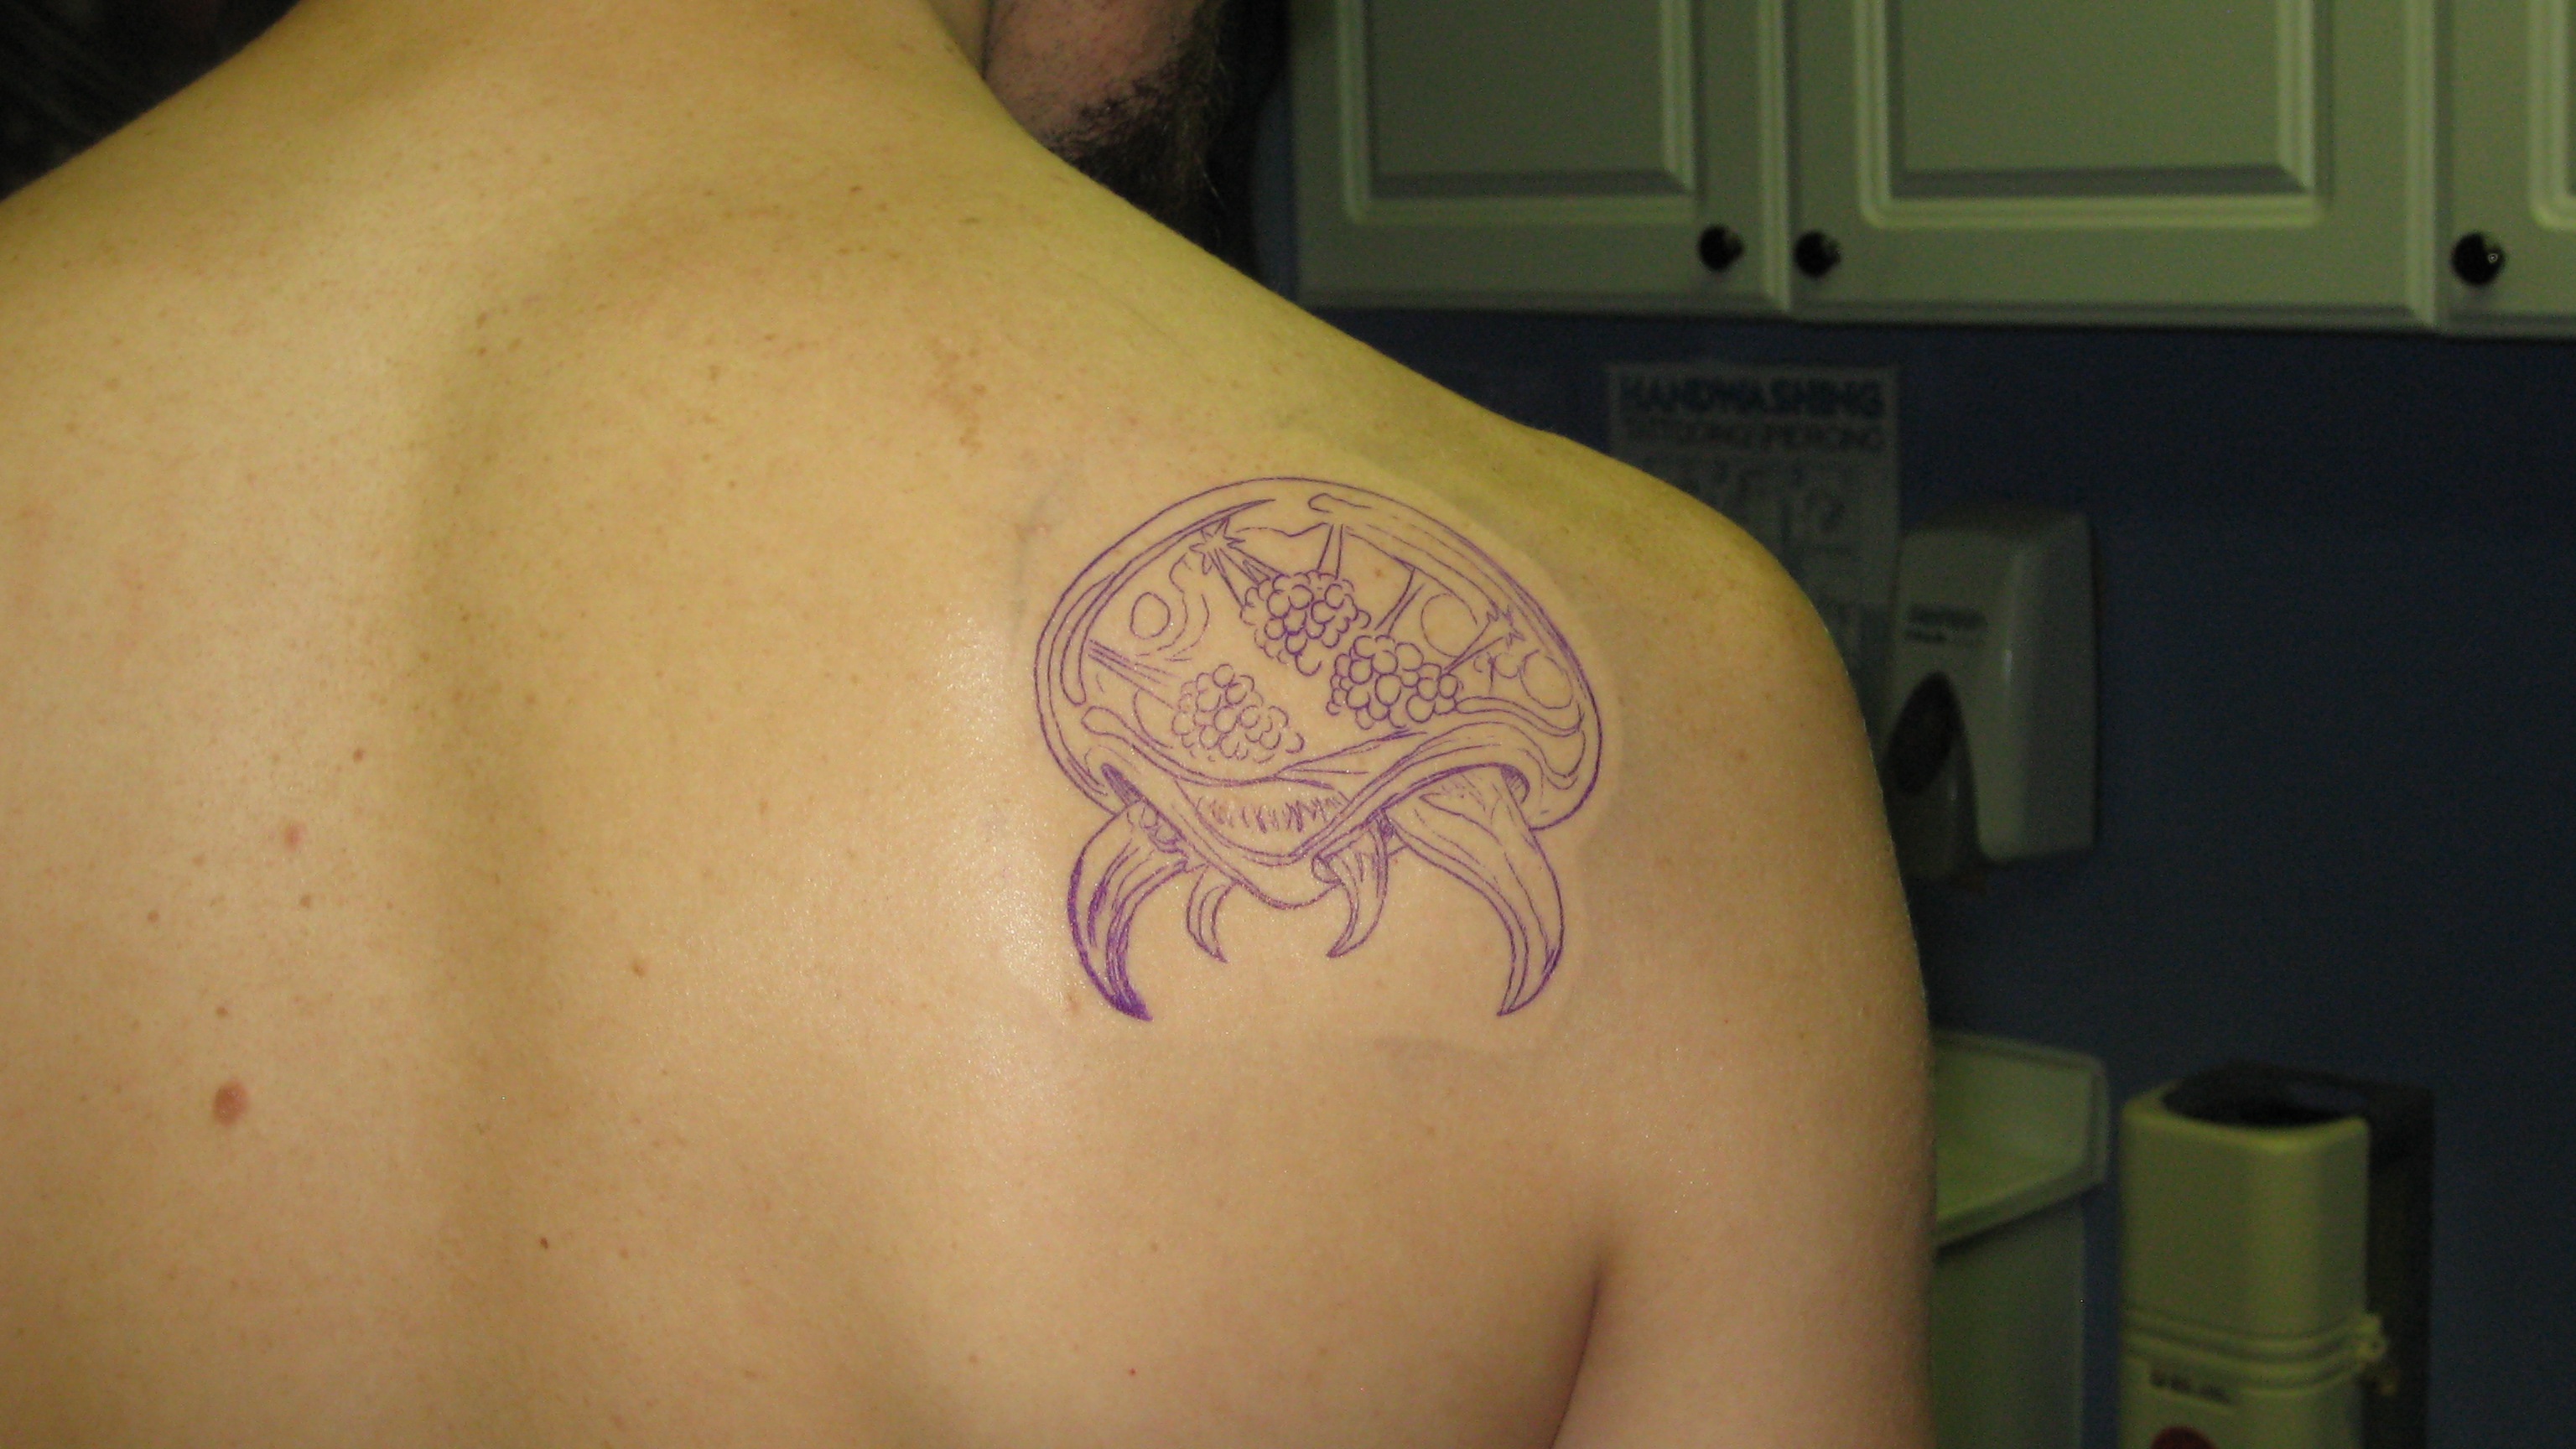 The stencil applied to her back shoulder